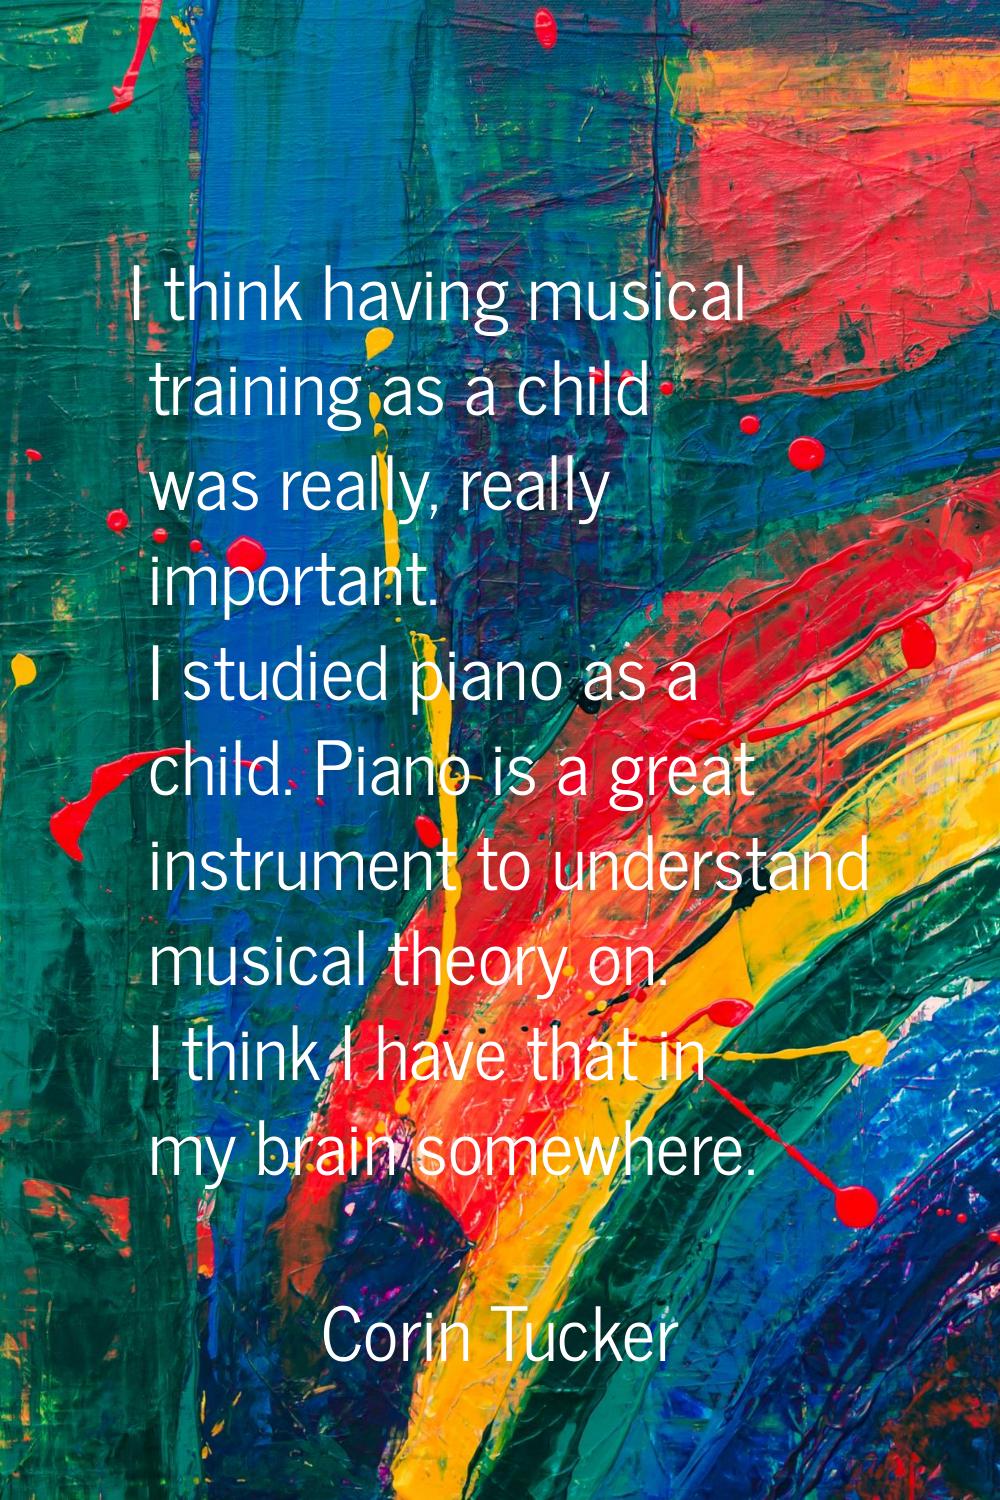 I think having musical training as a child was really, really important. I studied piano as a child